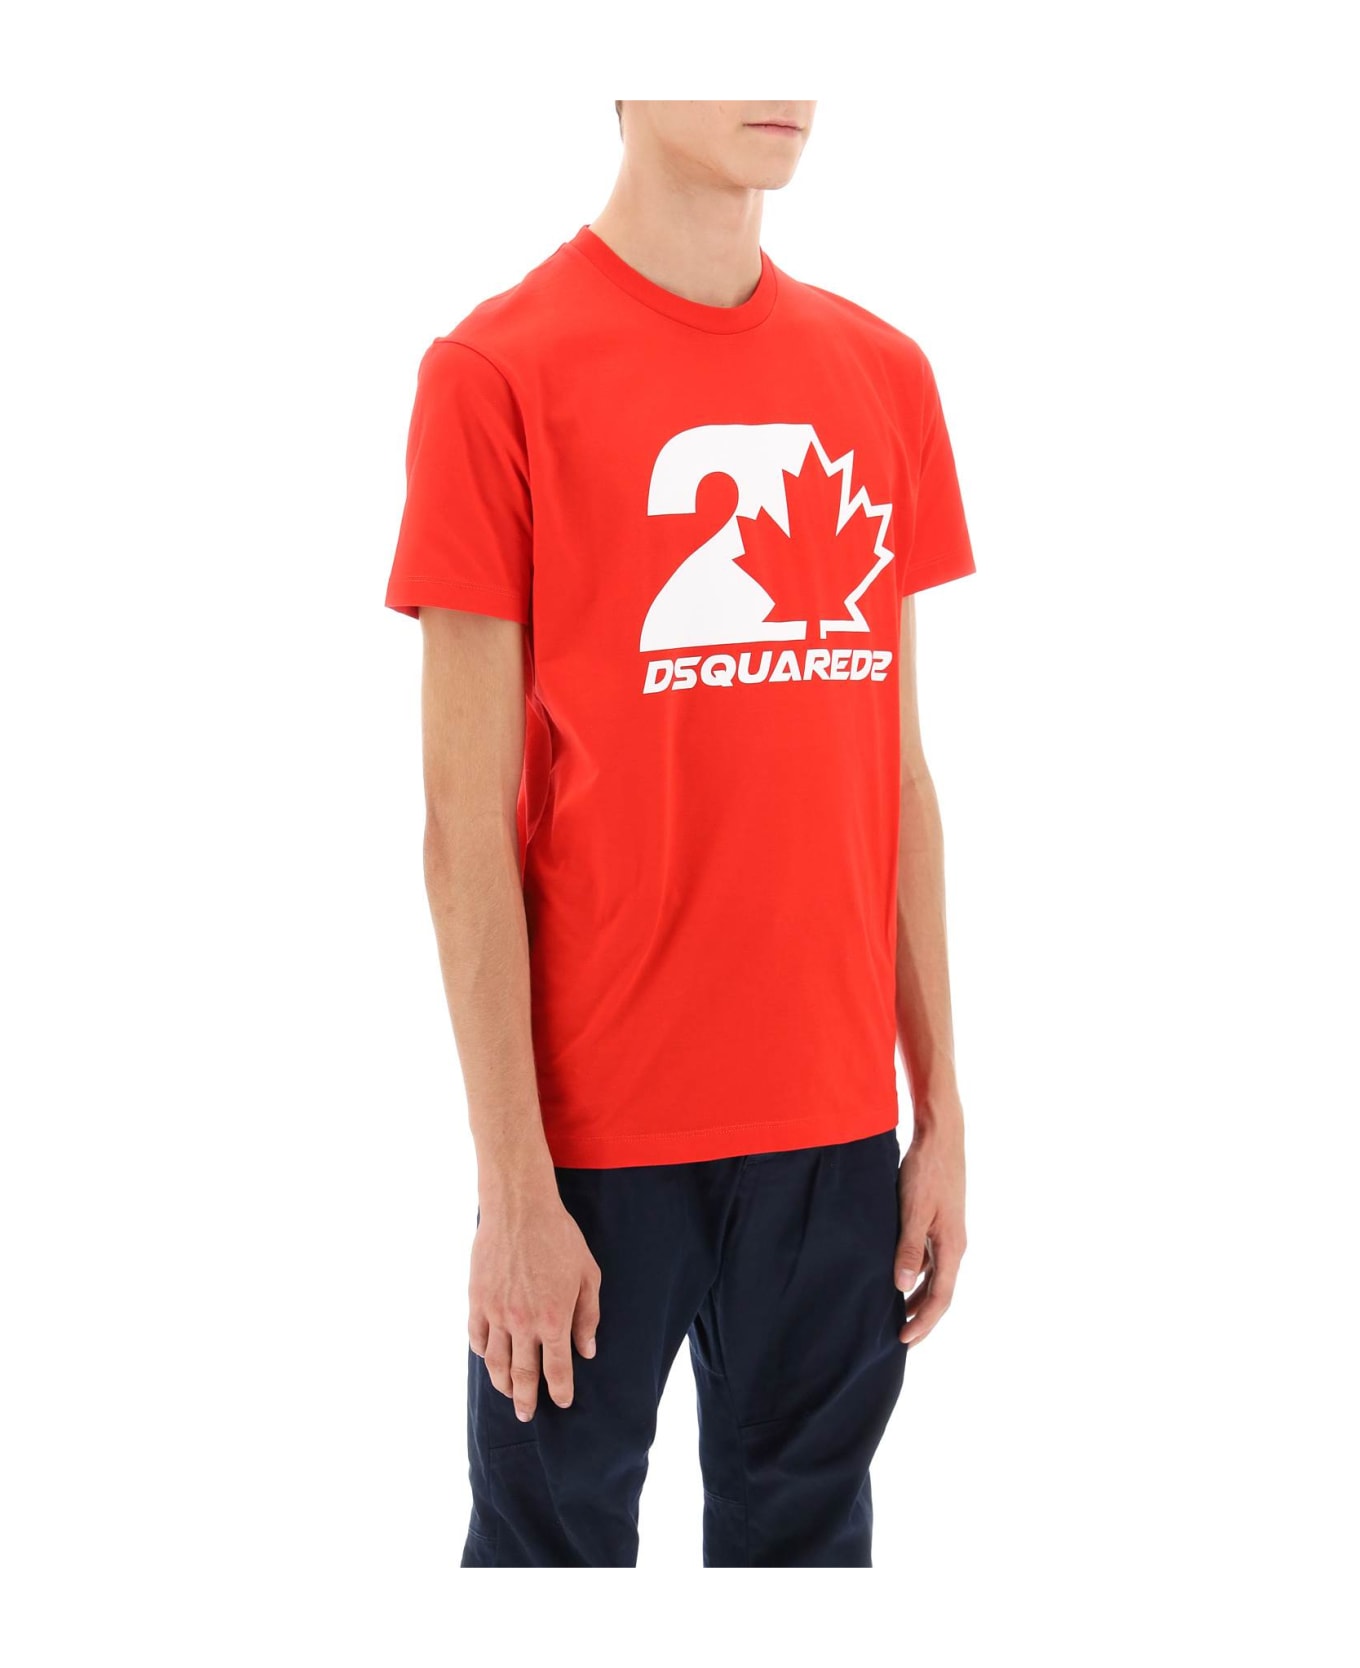 Dsquared2 Printed T-shirt - RED (Red)